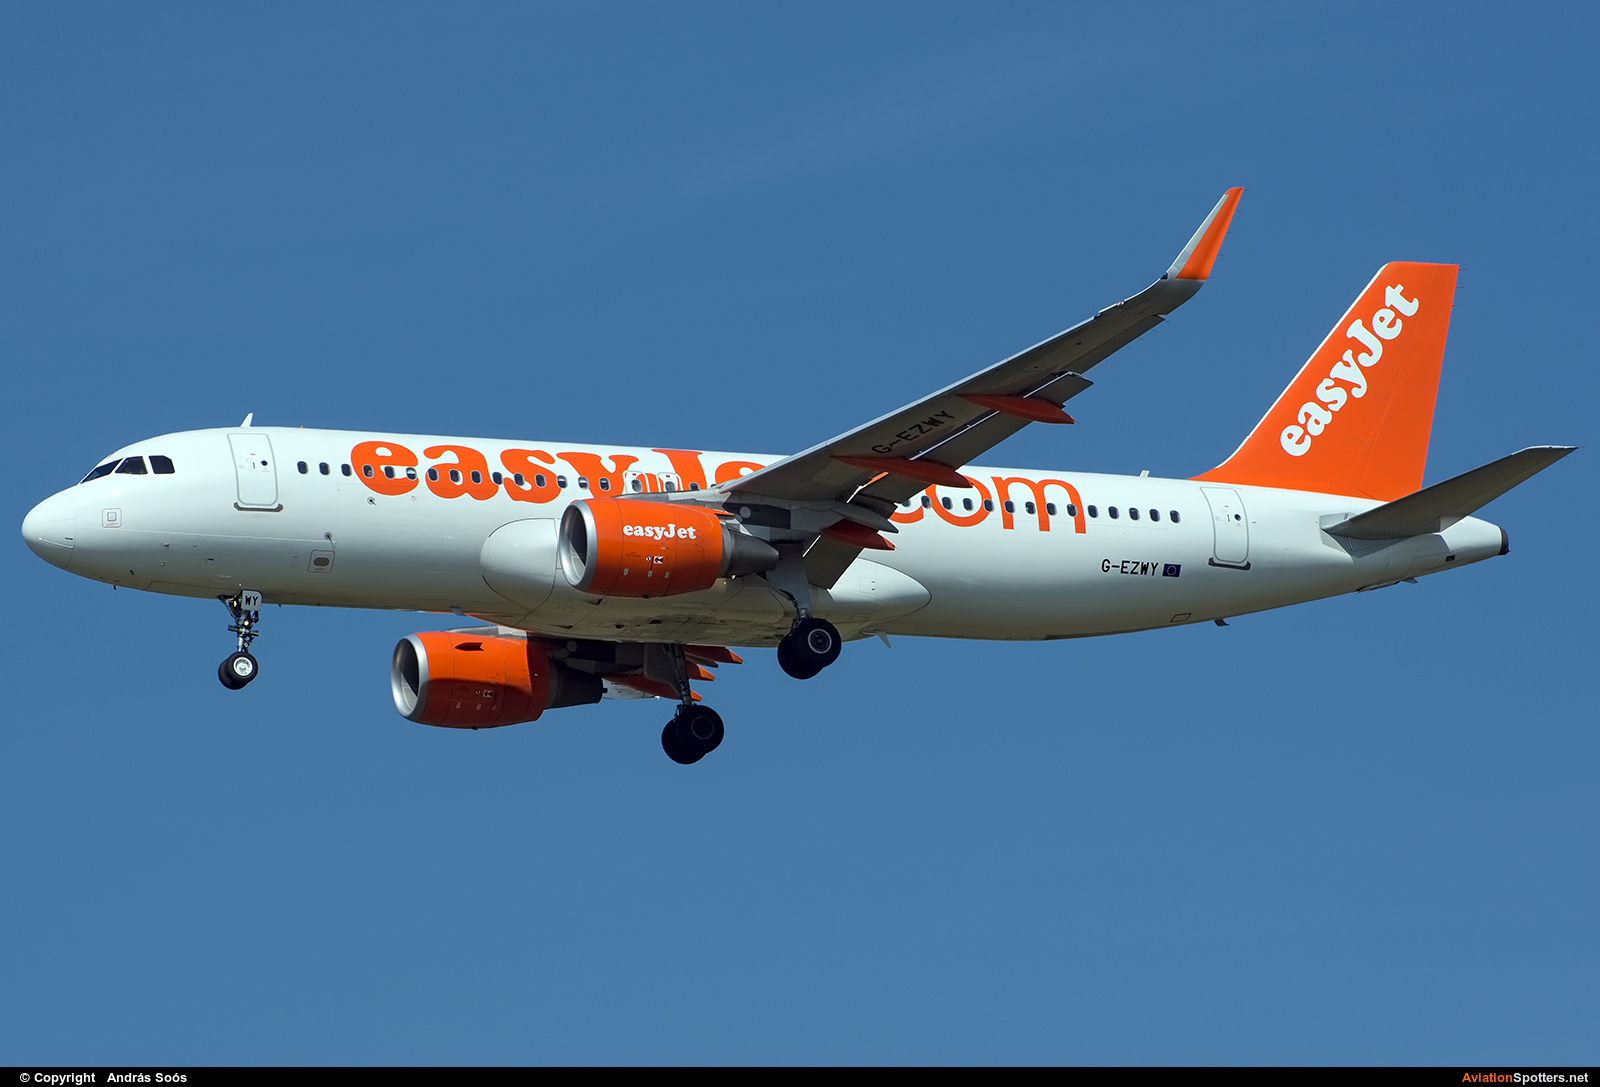 easyJet  -  A320-214  (G-EZWY) By András Soós (sas1965)